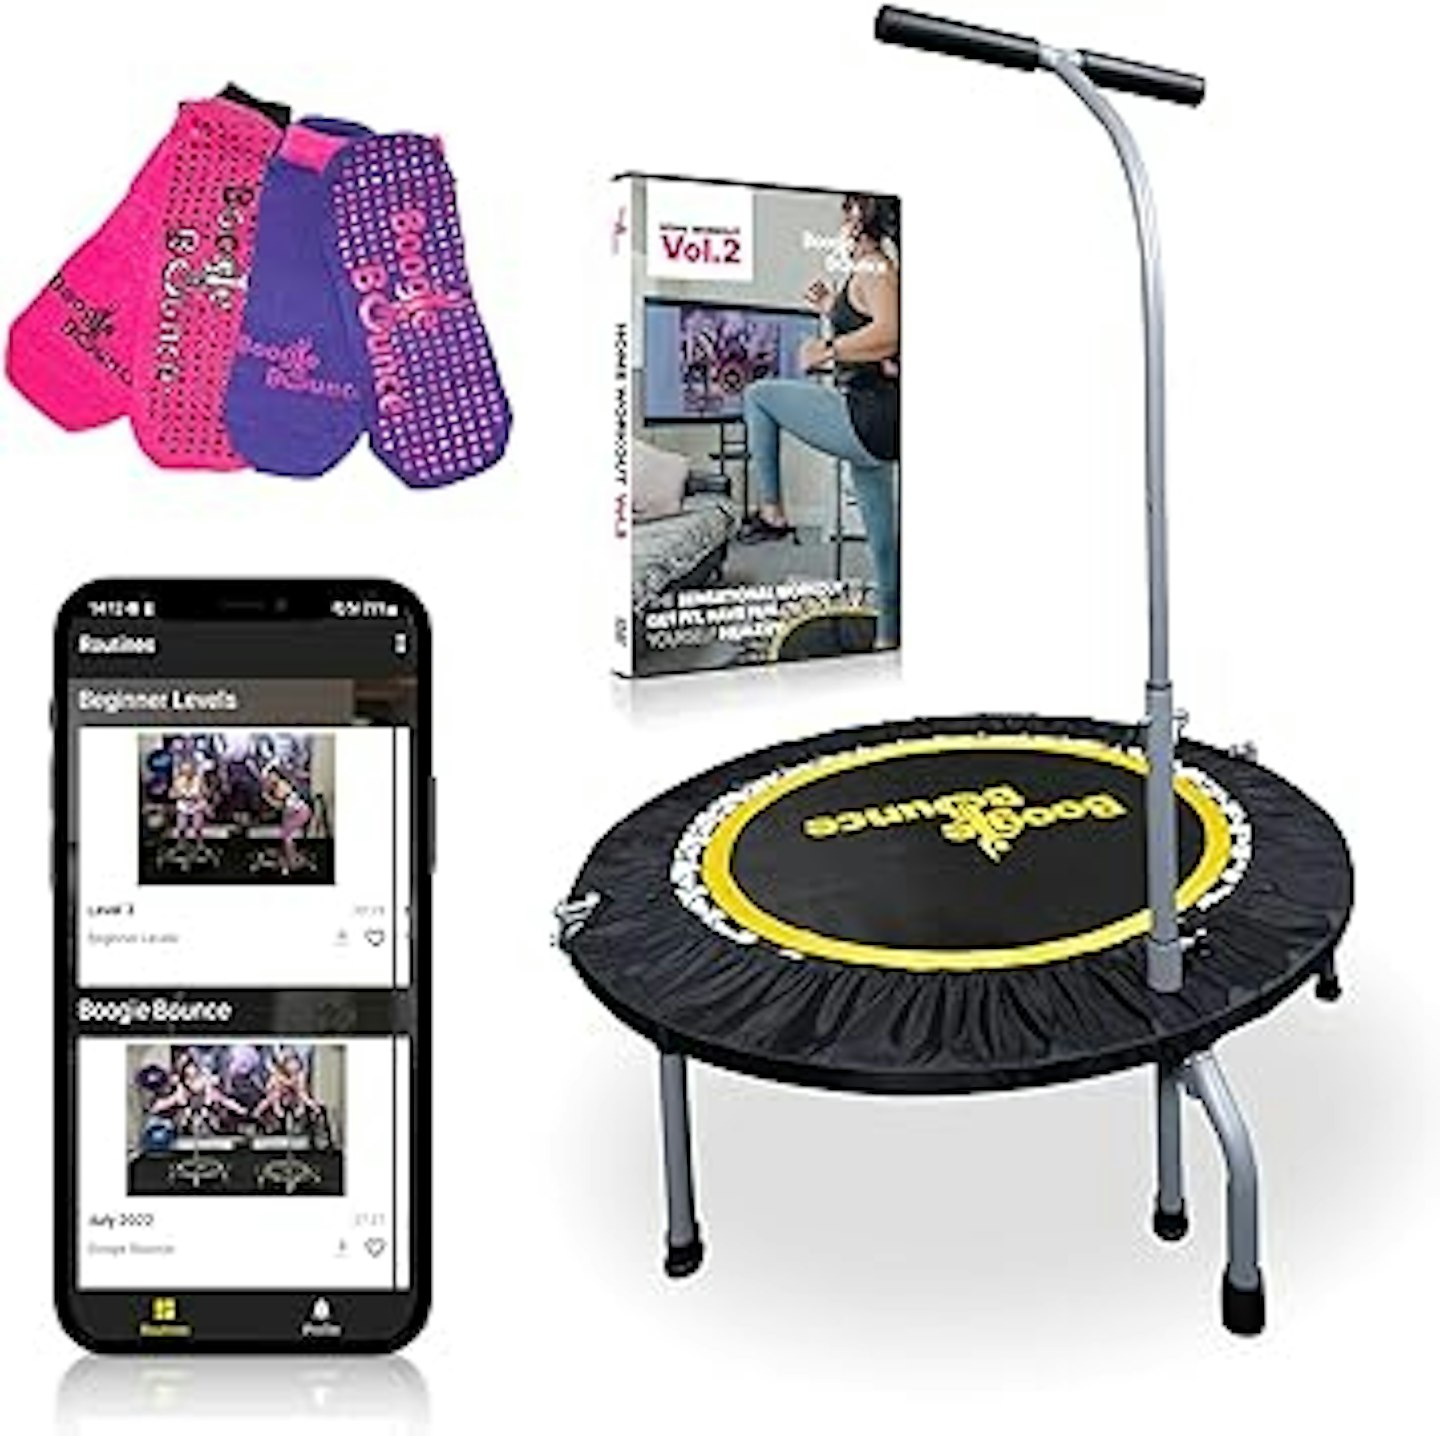 Boogie Bounce exercise trampoline